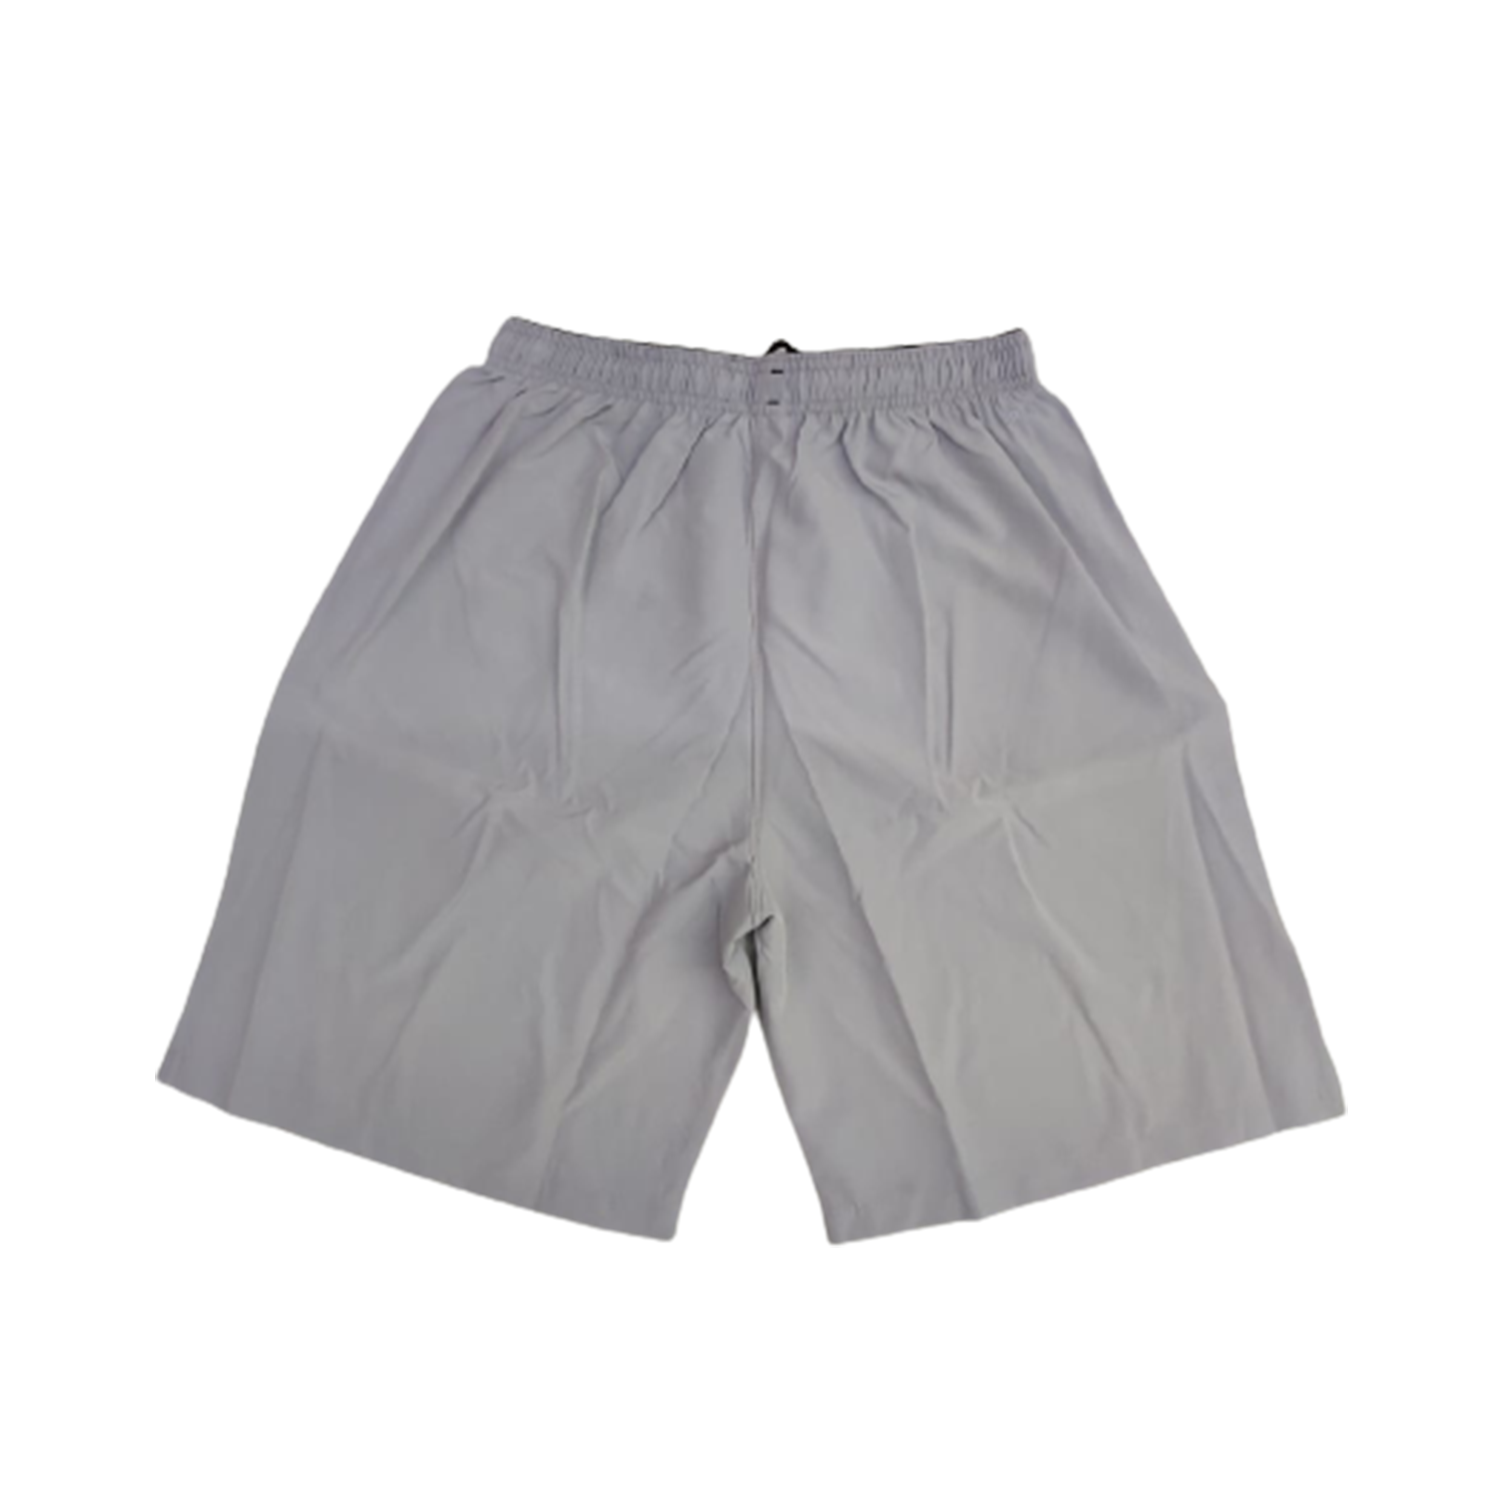 Plain Shorts (4 Pieces in 1 Pkt )